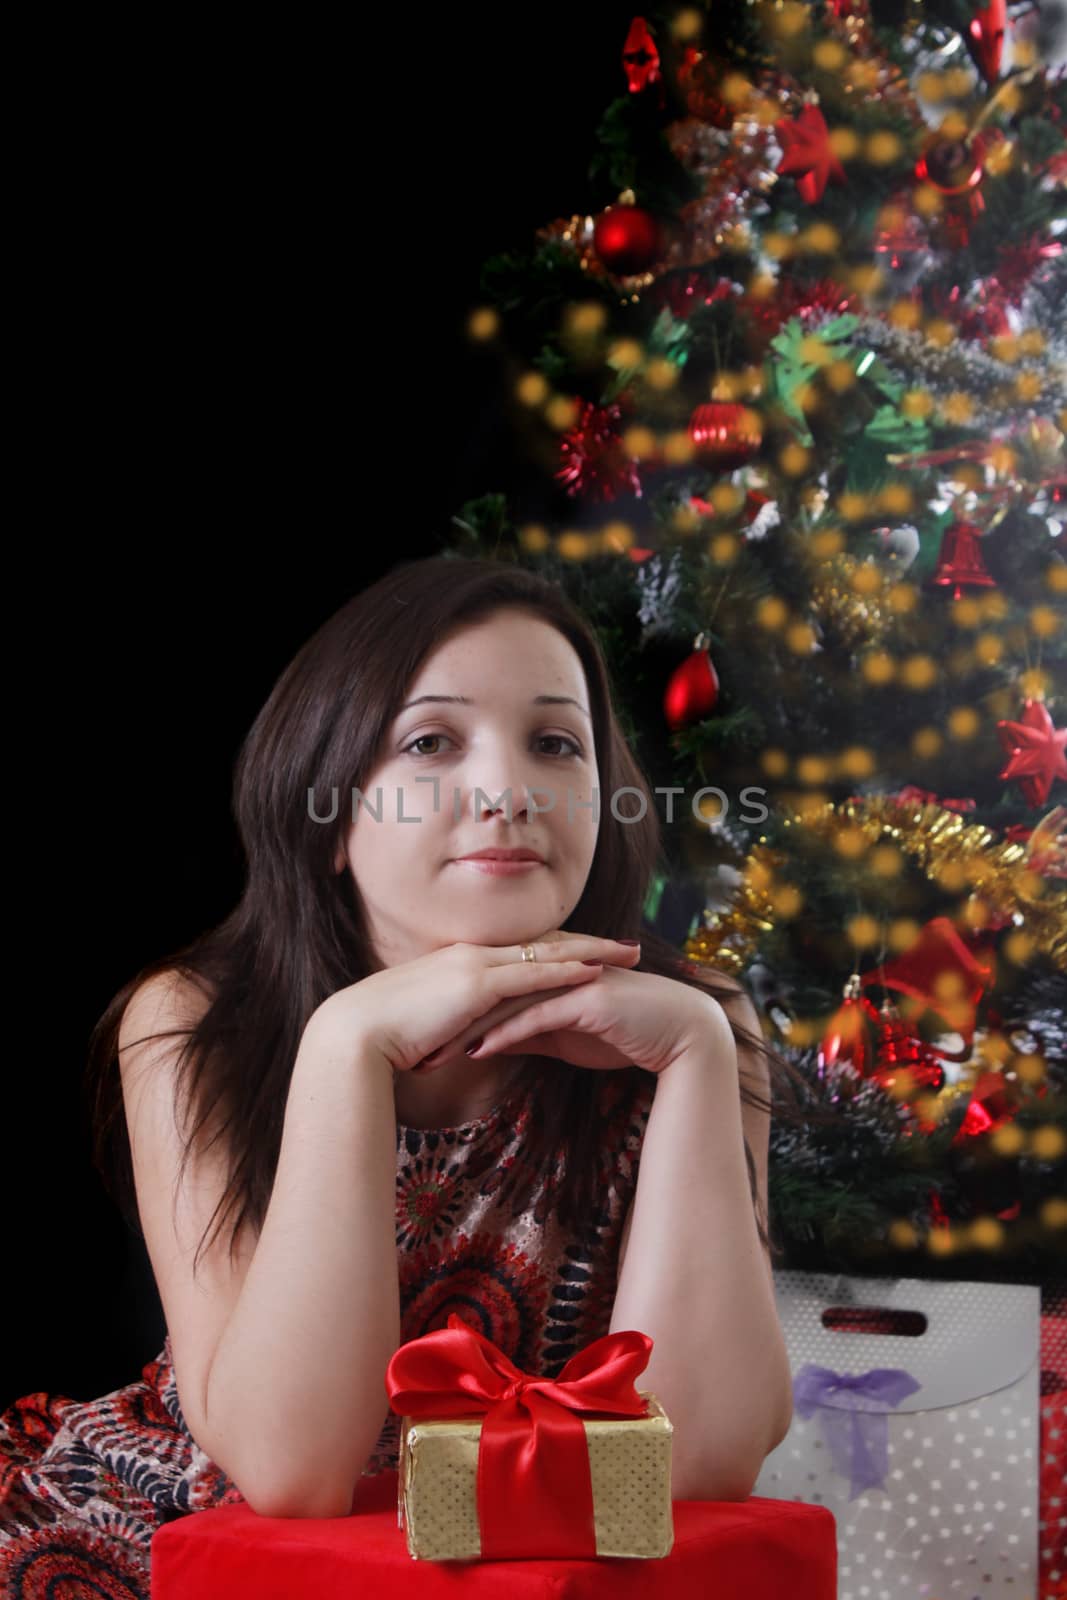 Pretty woman with gifts under Christmas tree on balck